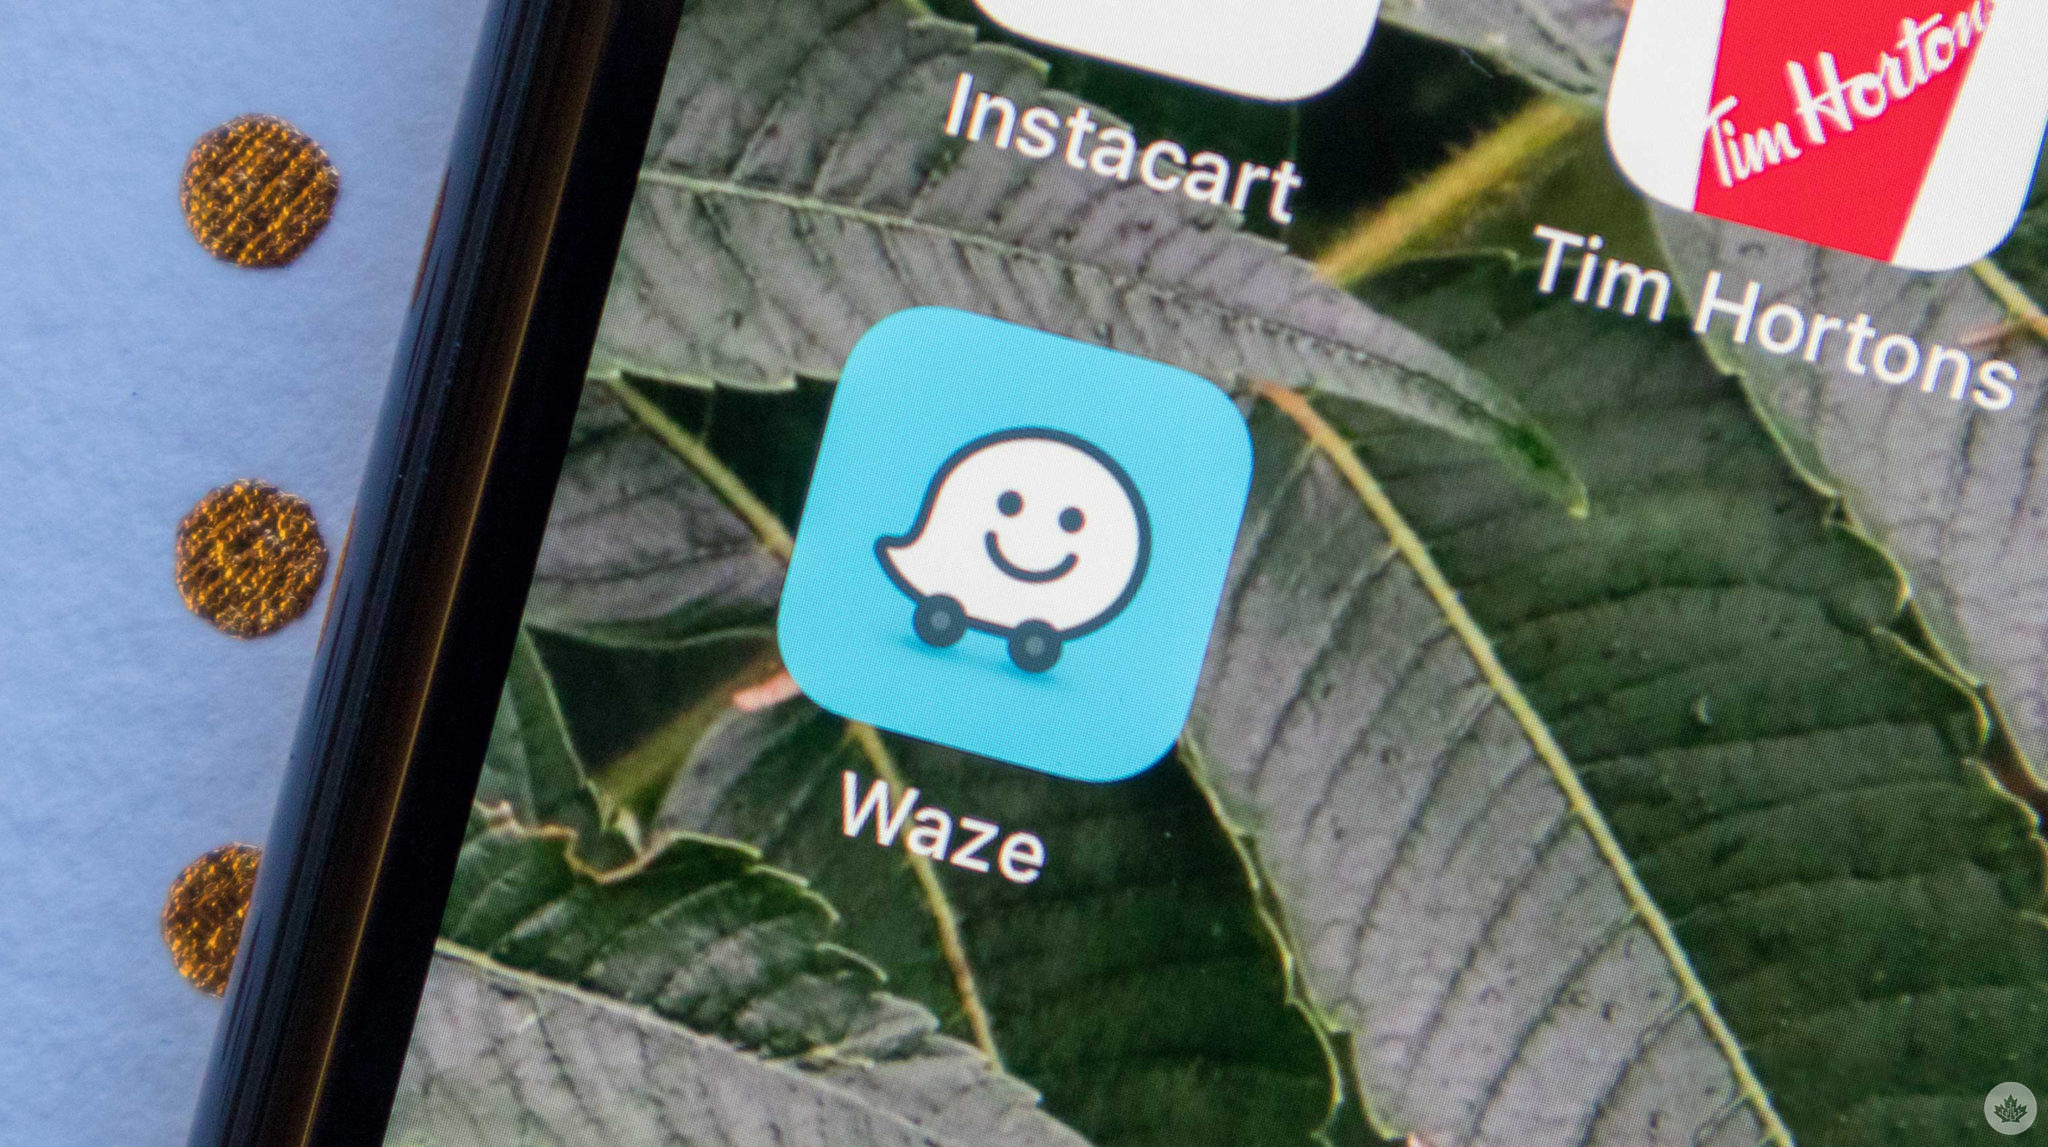 Home was 2022’s most trafficked destination on Waze